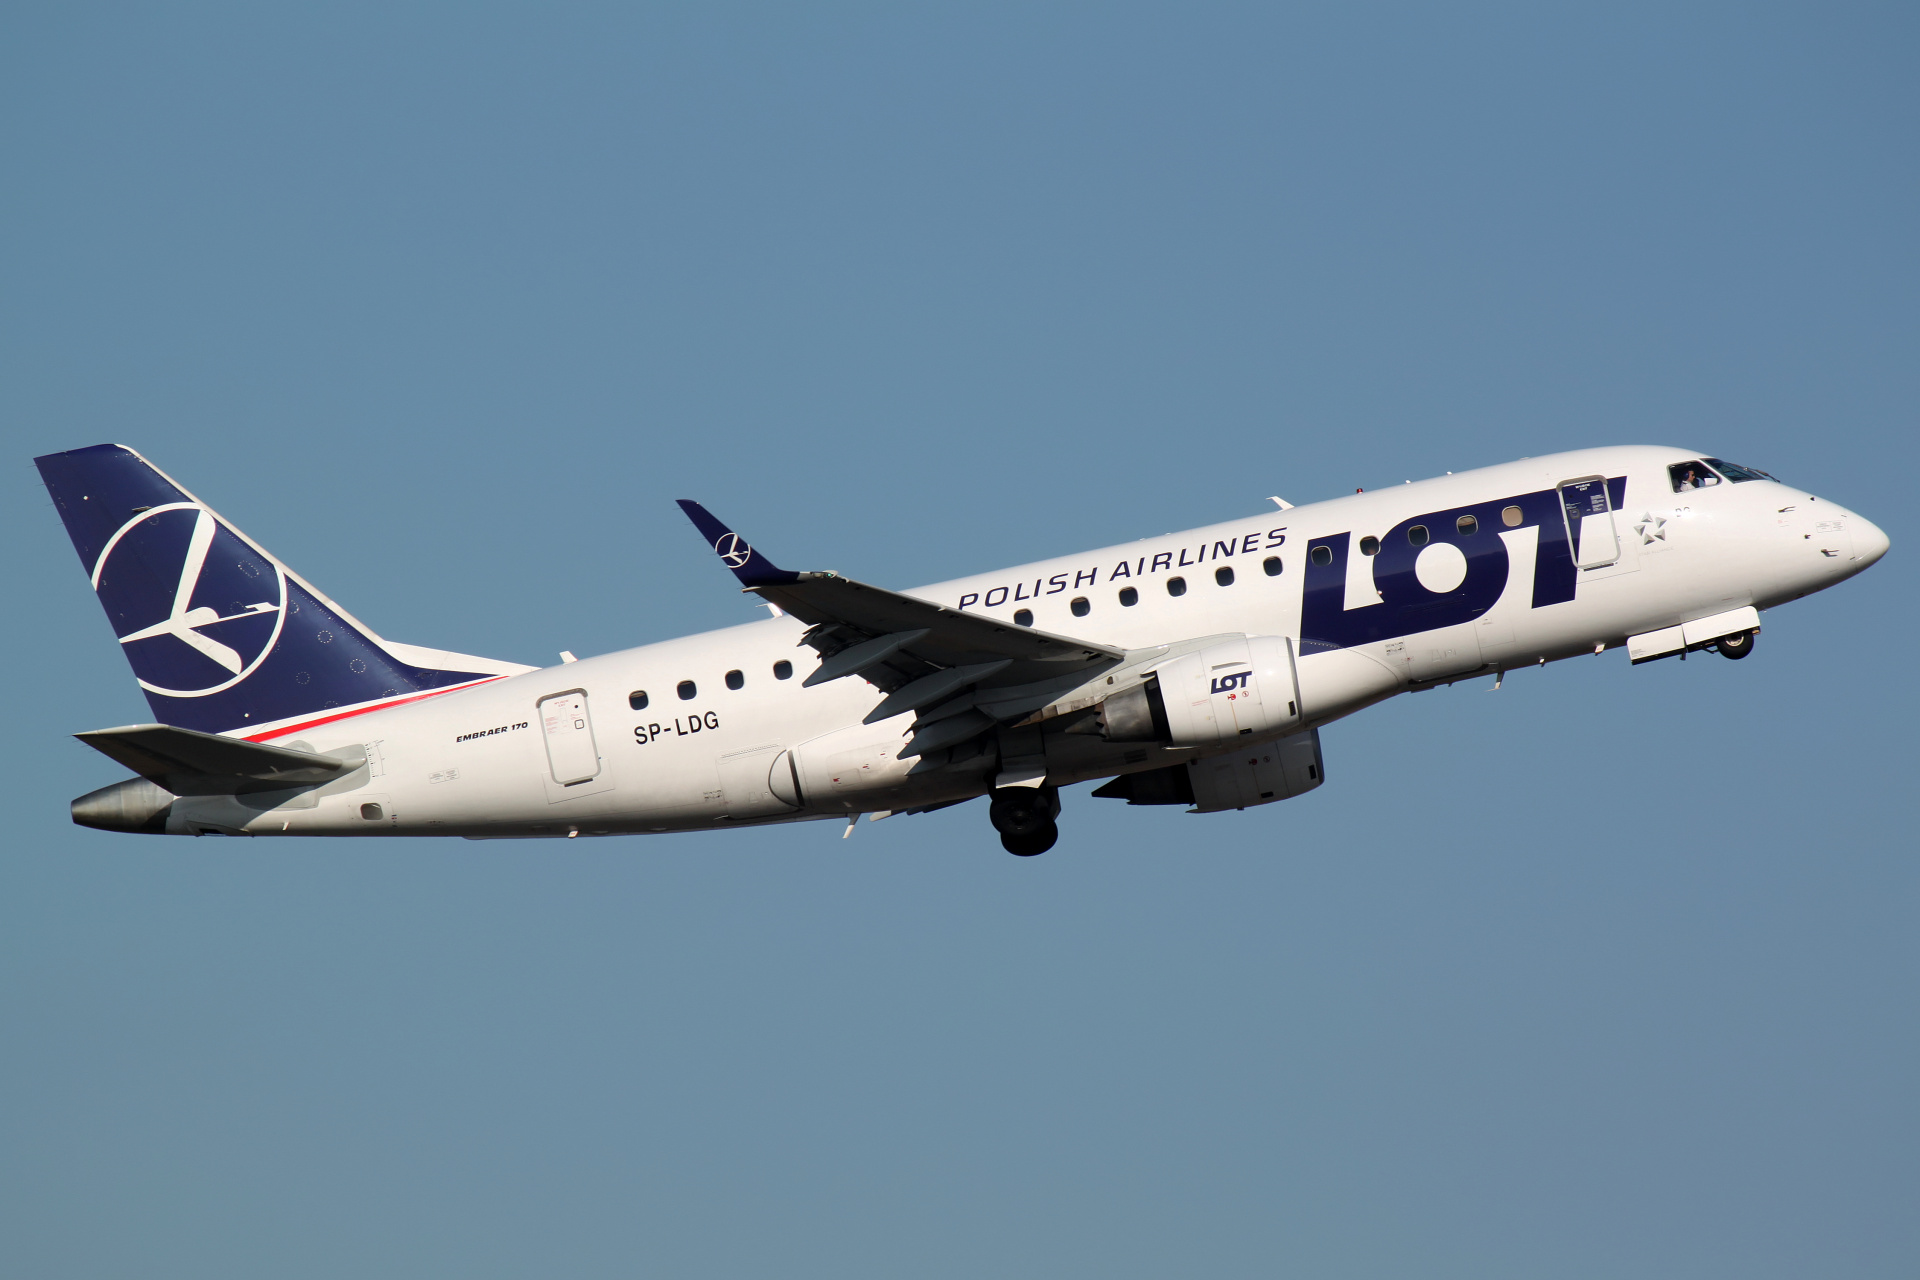 SP-LDG (new livery) (Aircraft » EPWA Spotting » Embraer E170 » LOT Polish Airlines)